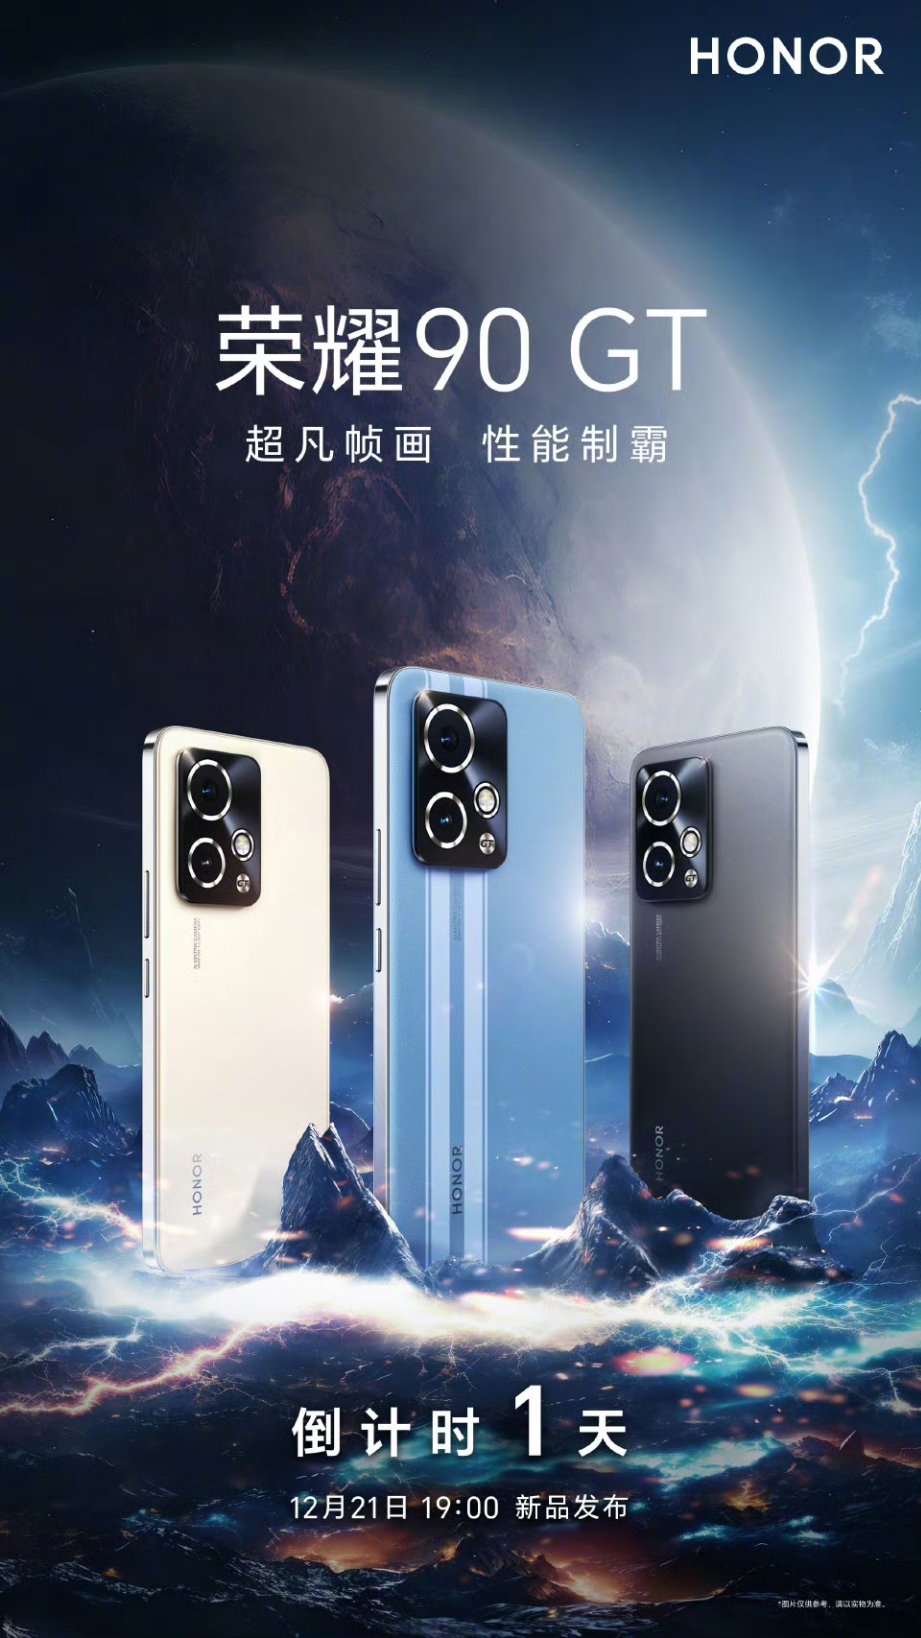 Honor 90 Pro and Honor 90 debut in China